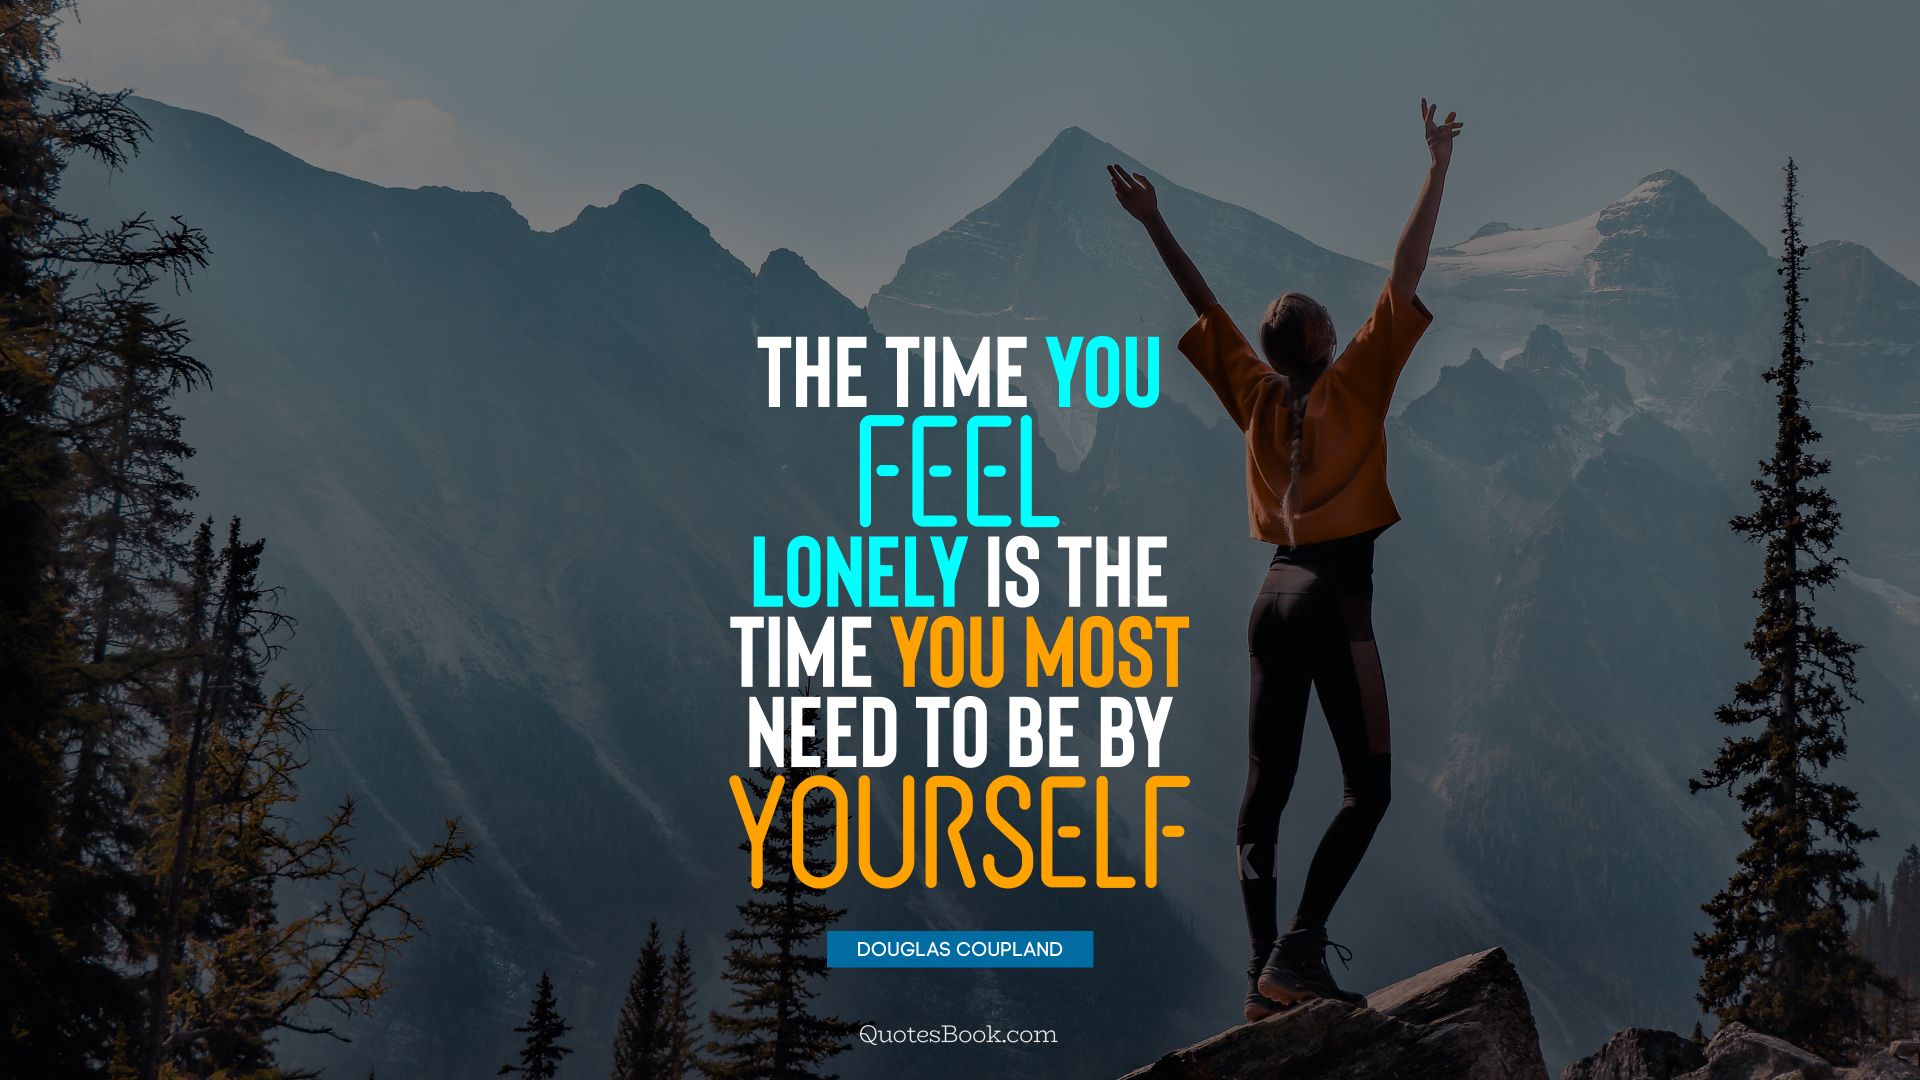 The time you feel lonely is the time you most need to be by yourself. - Quote by Douglas Coupland